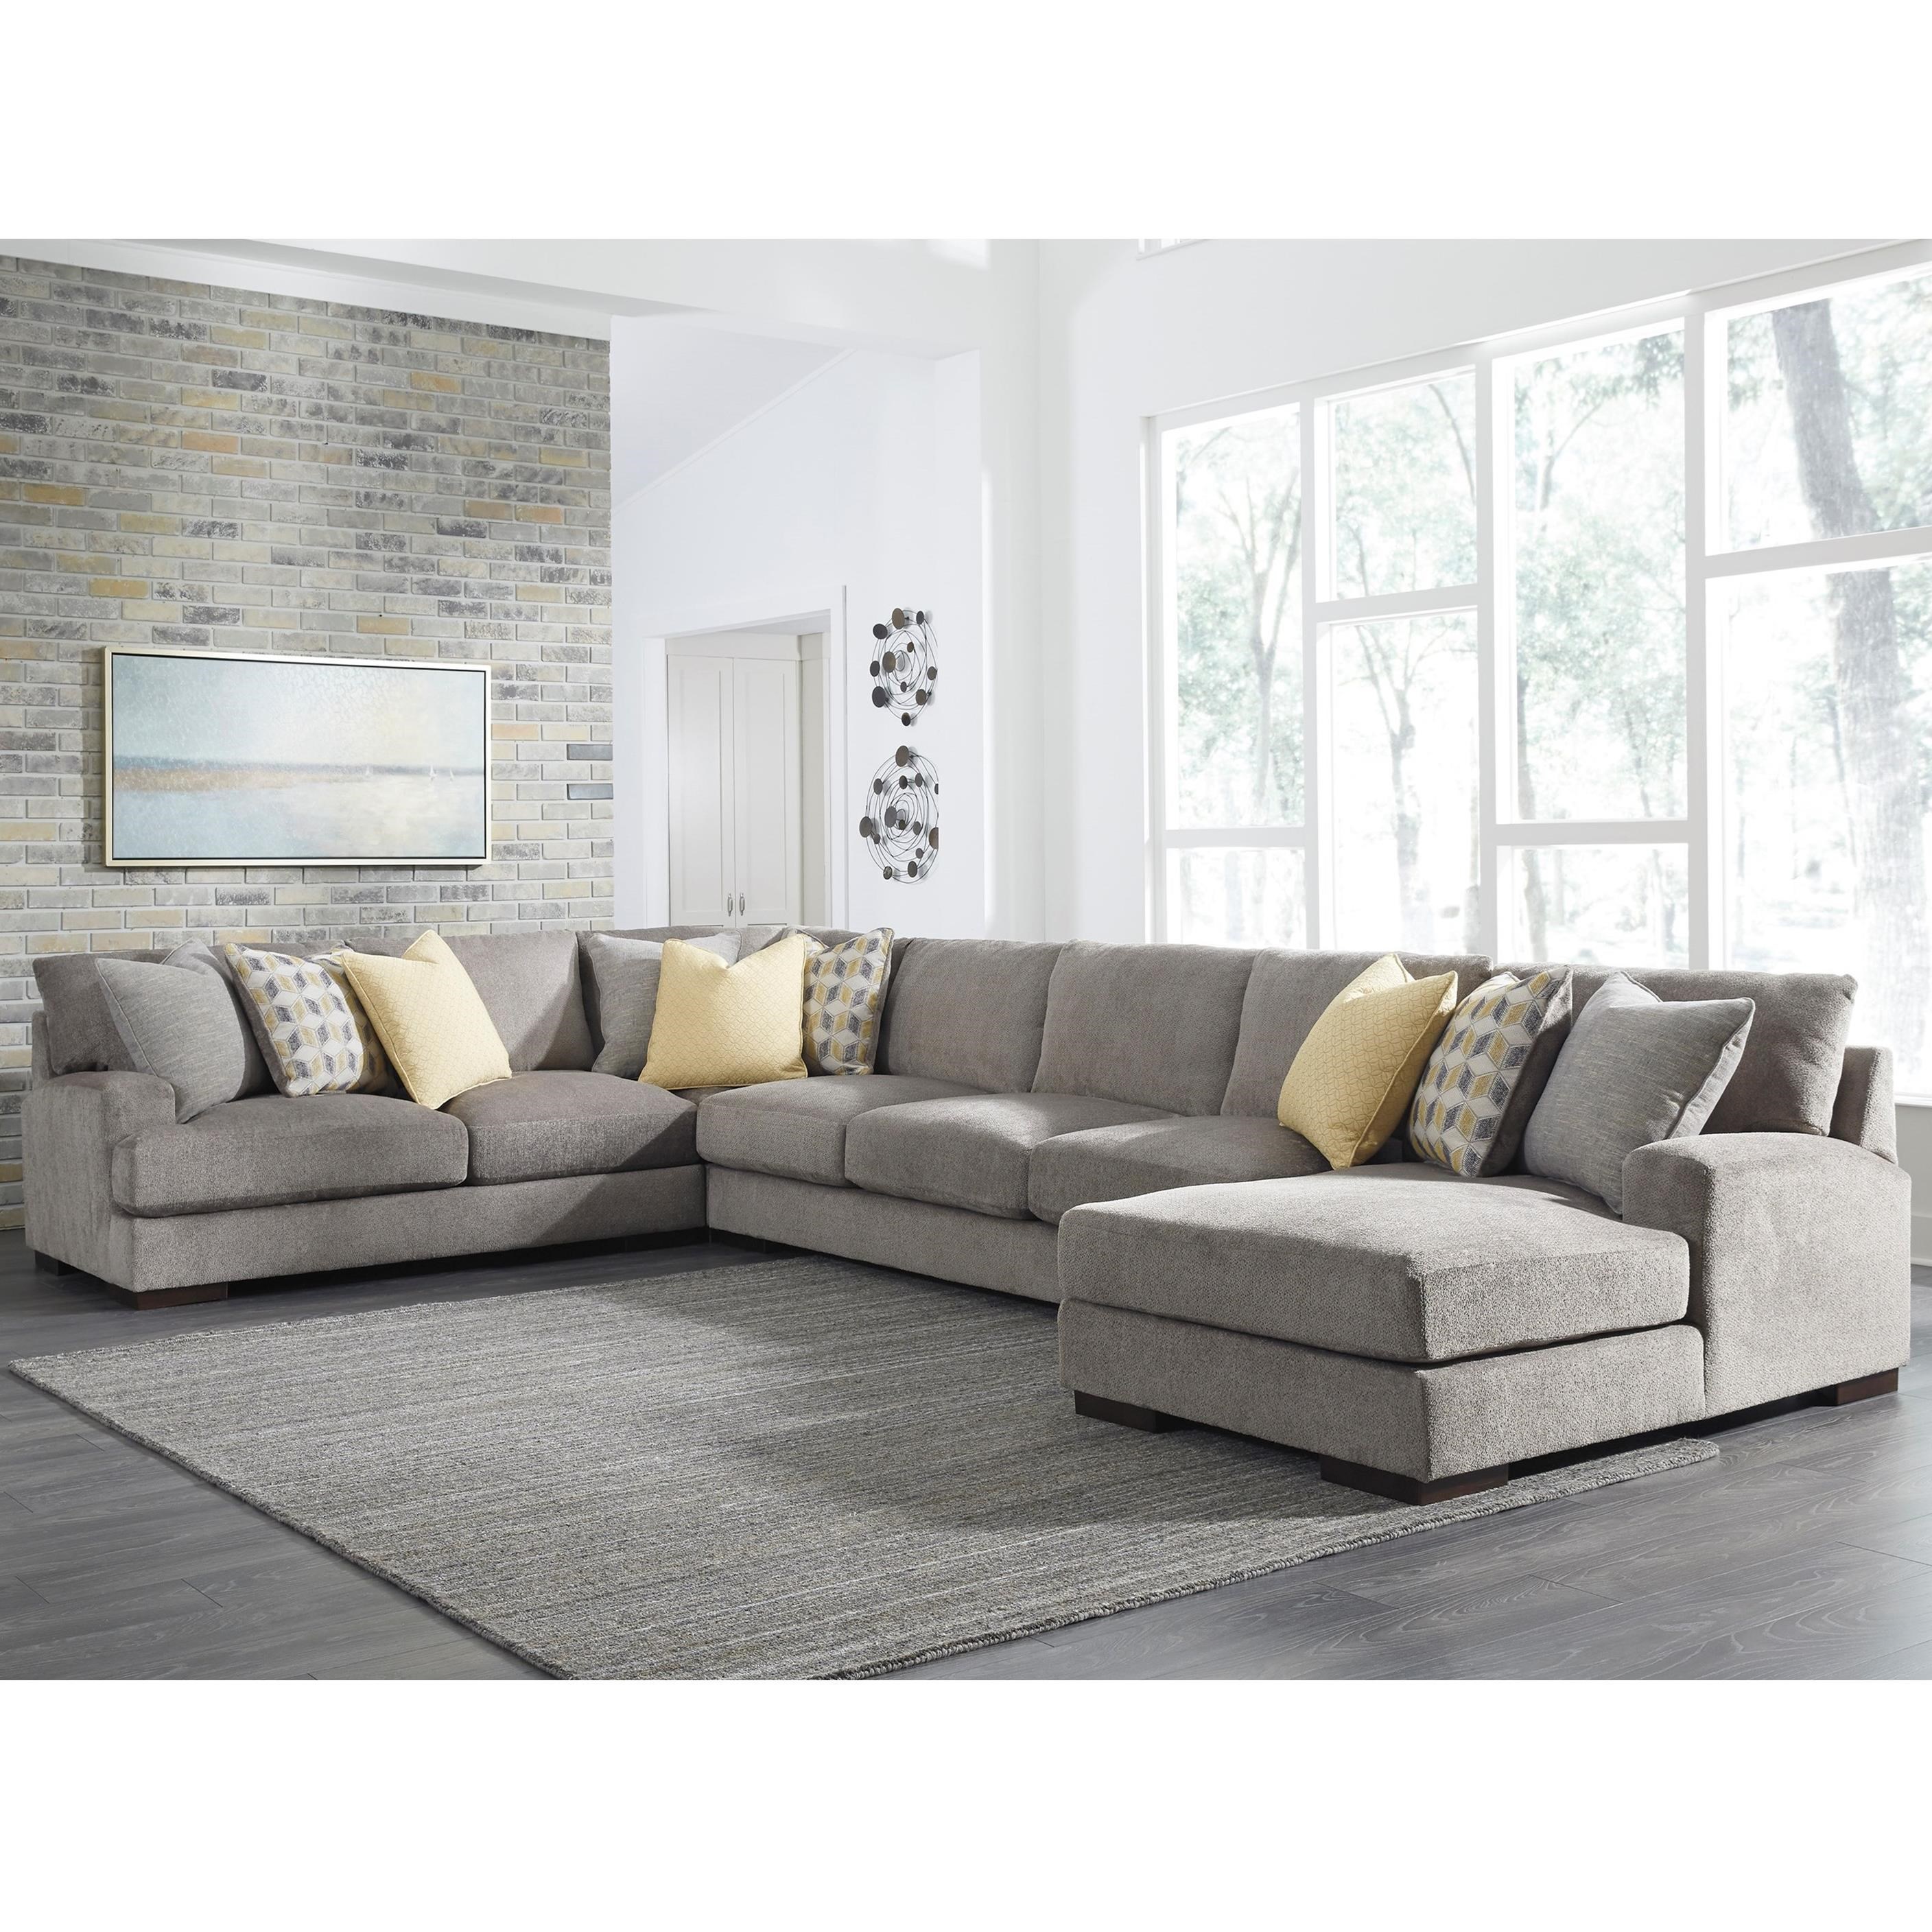 Benchcraft Fallsworth Large Contemporary 4 Piece Sectional